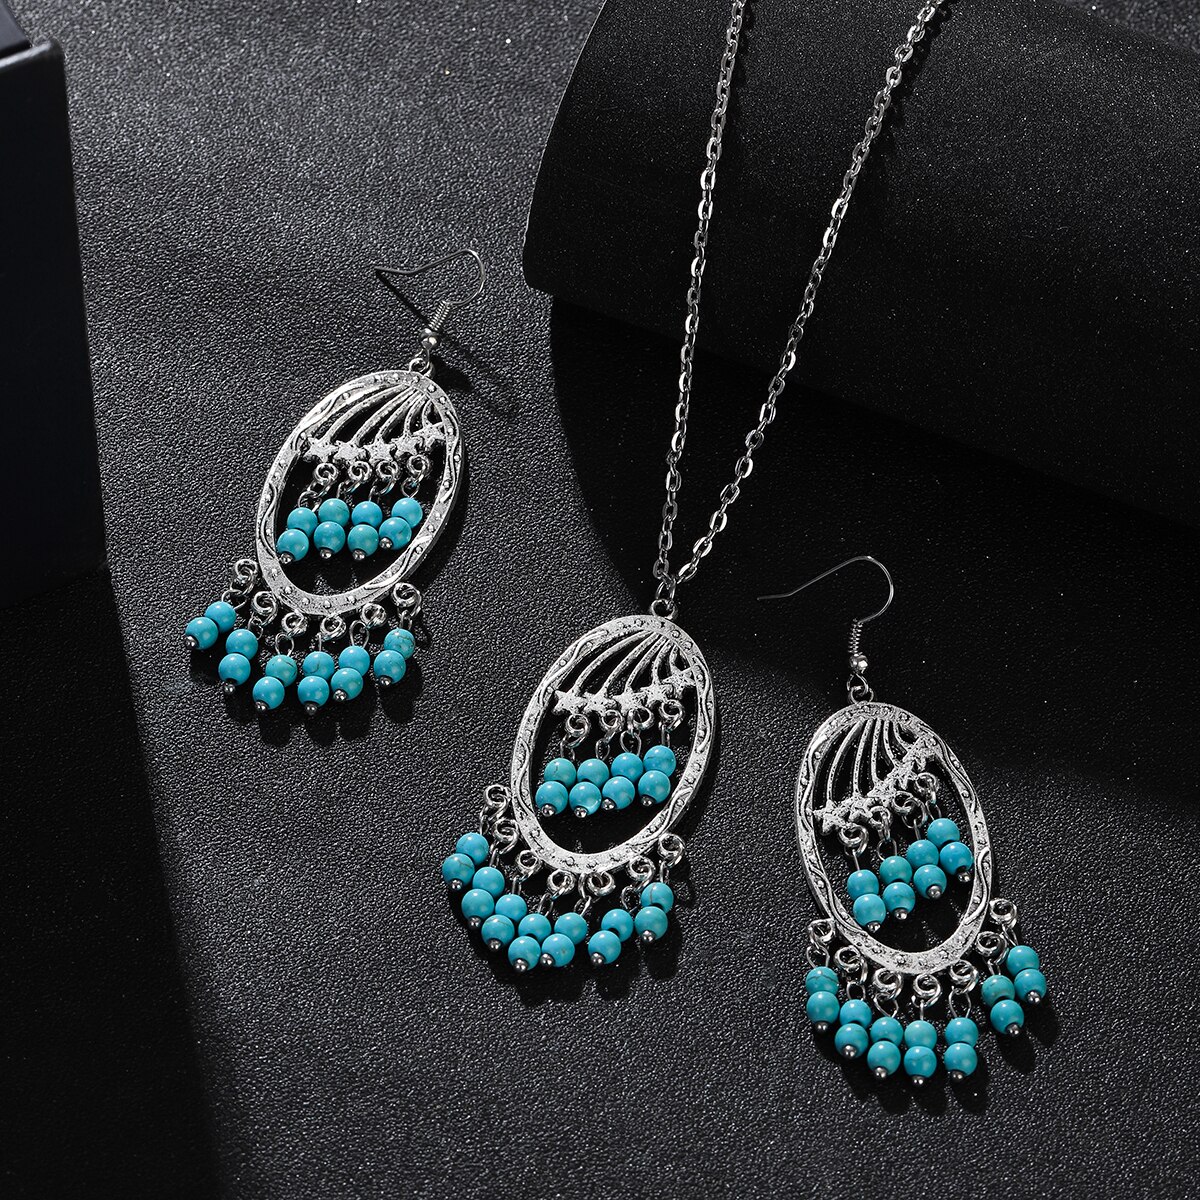 Ethnic-Boho-Blue-Stone-Tassel-Jewelry-Set-Charm-Ladies-Vintage-Jewelry-Silver-Color-Hollow-Flower-Ch-1005005134002231-7